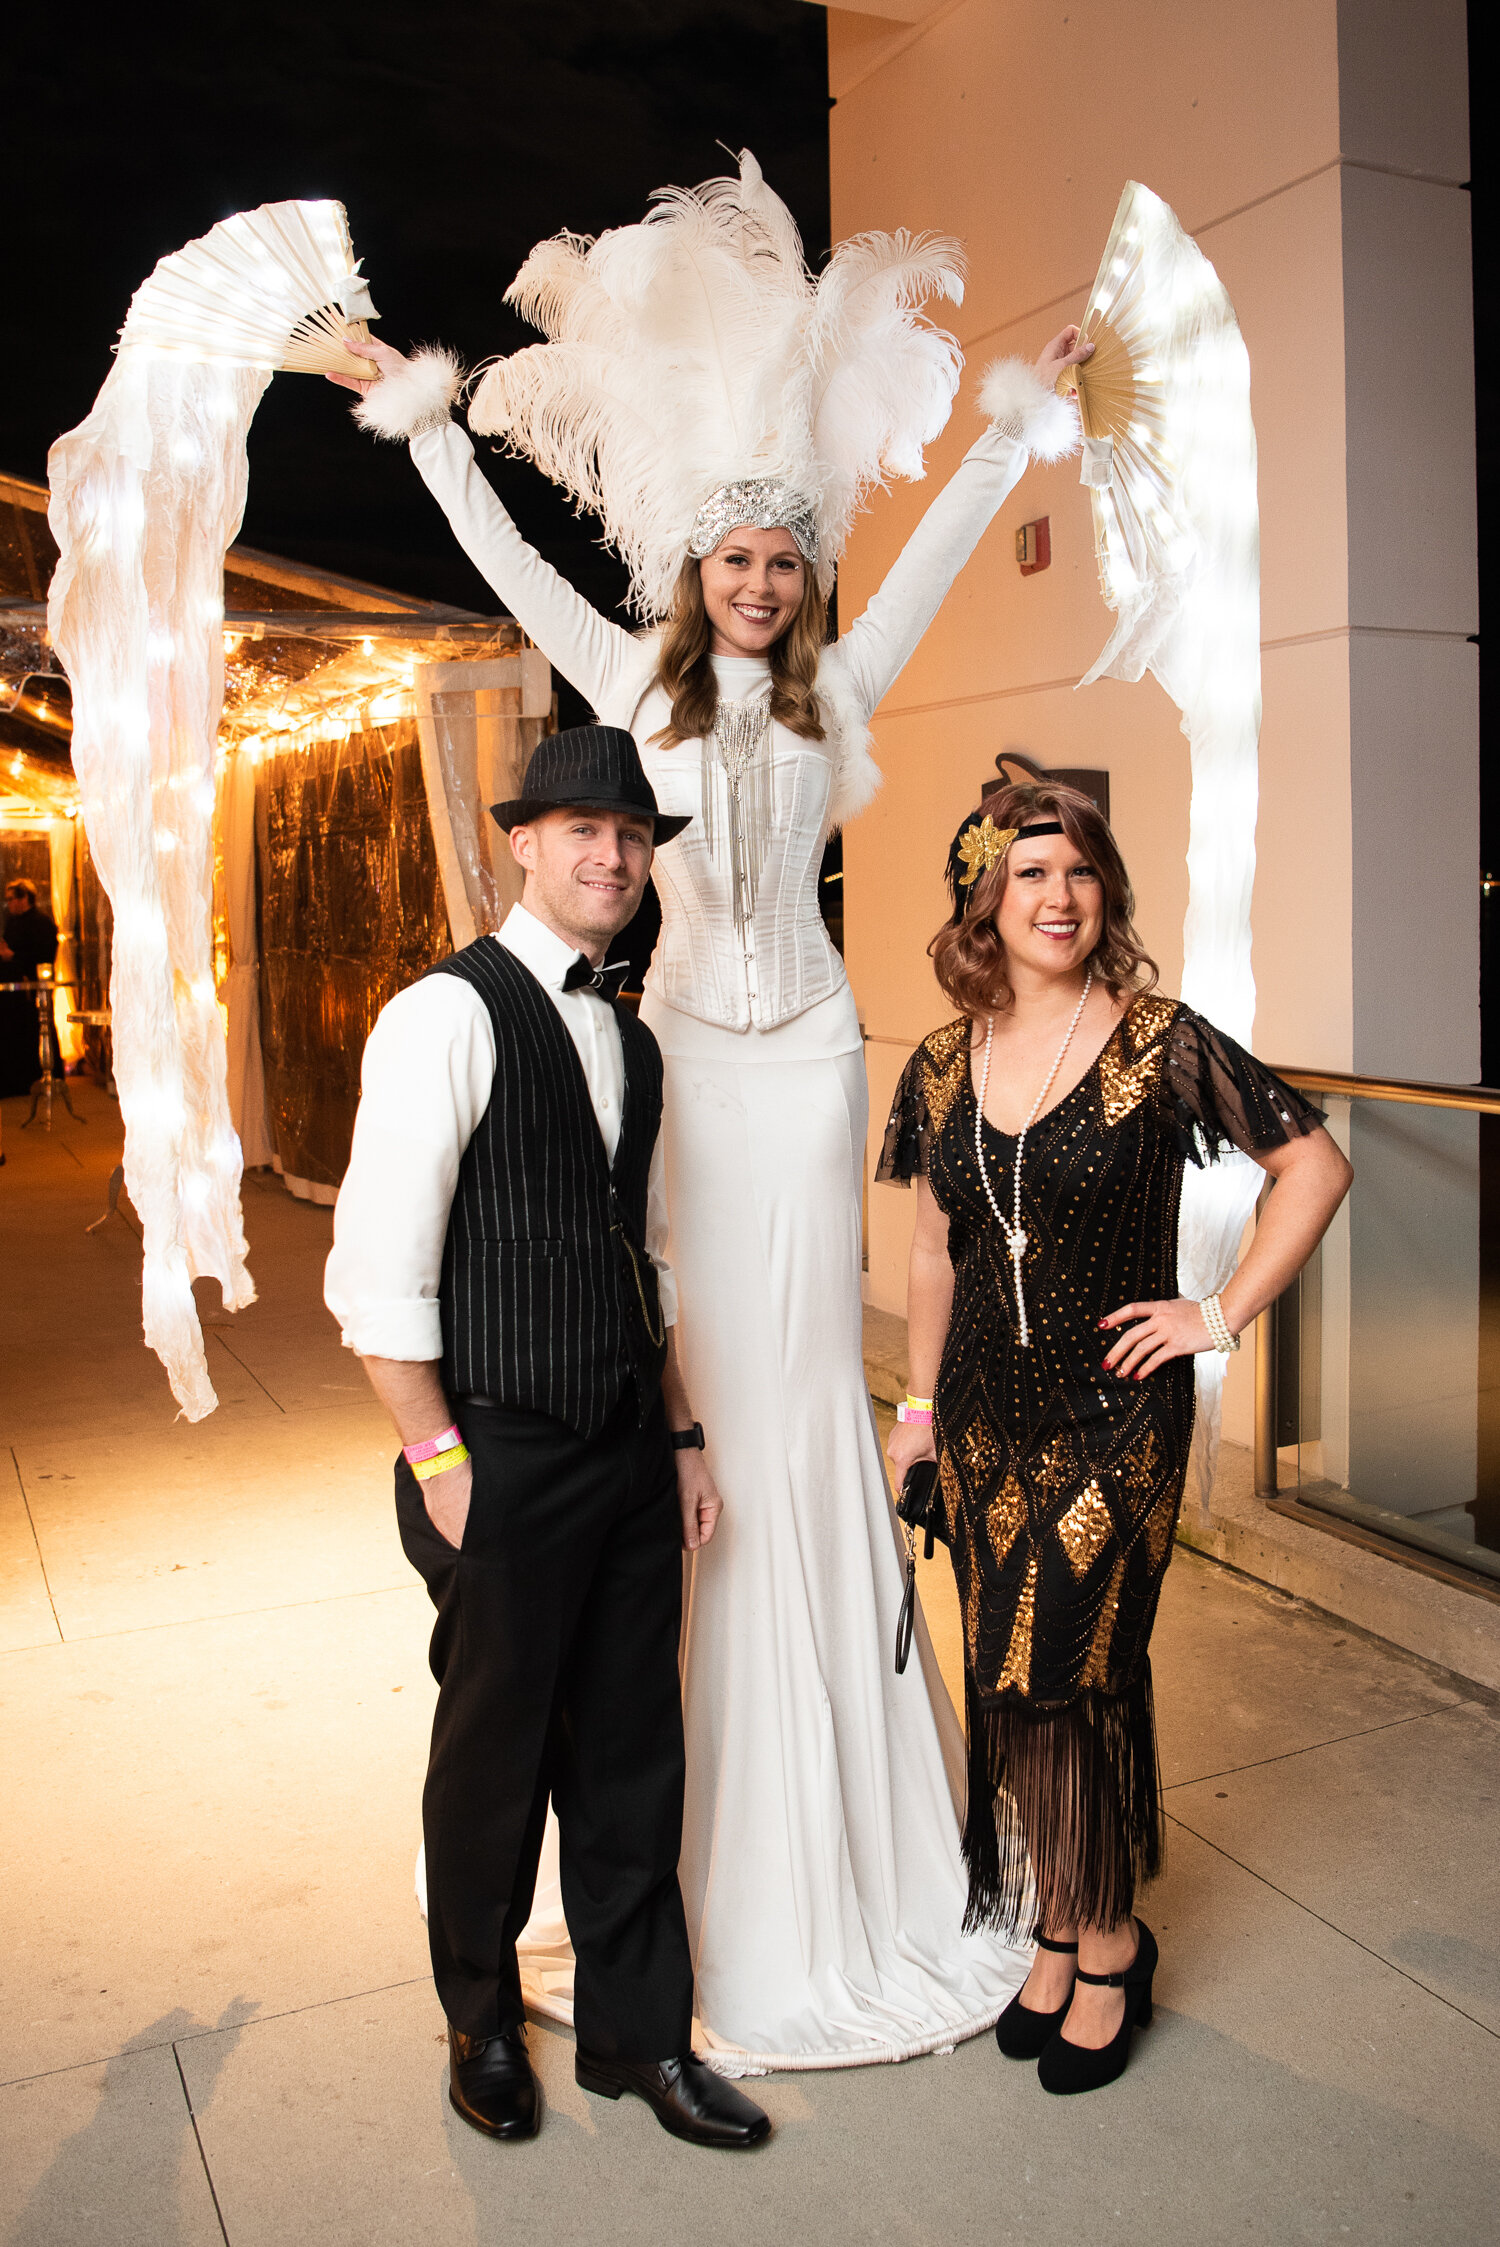 The Great Gatsby Gala - Bright Ideas Event Agency